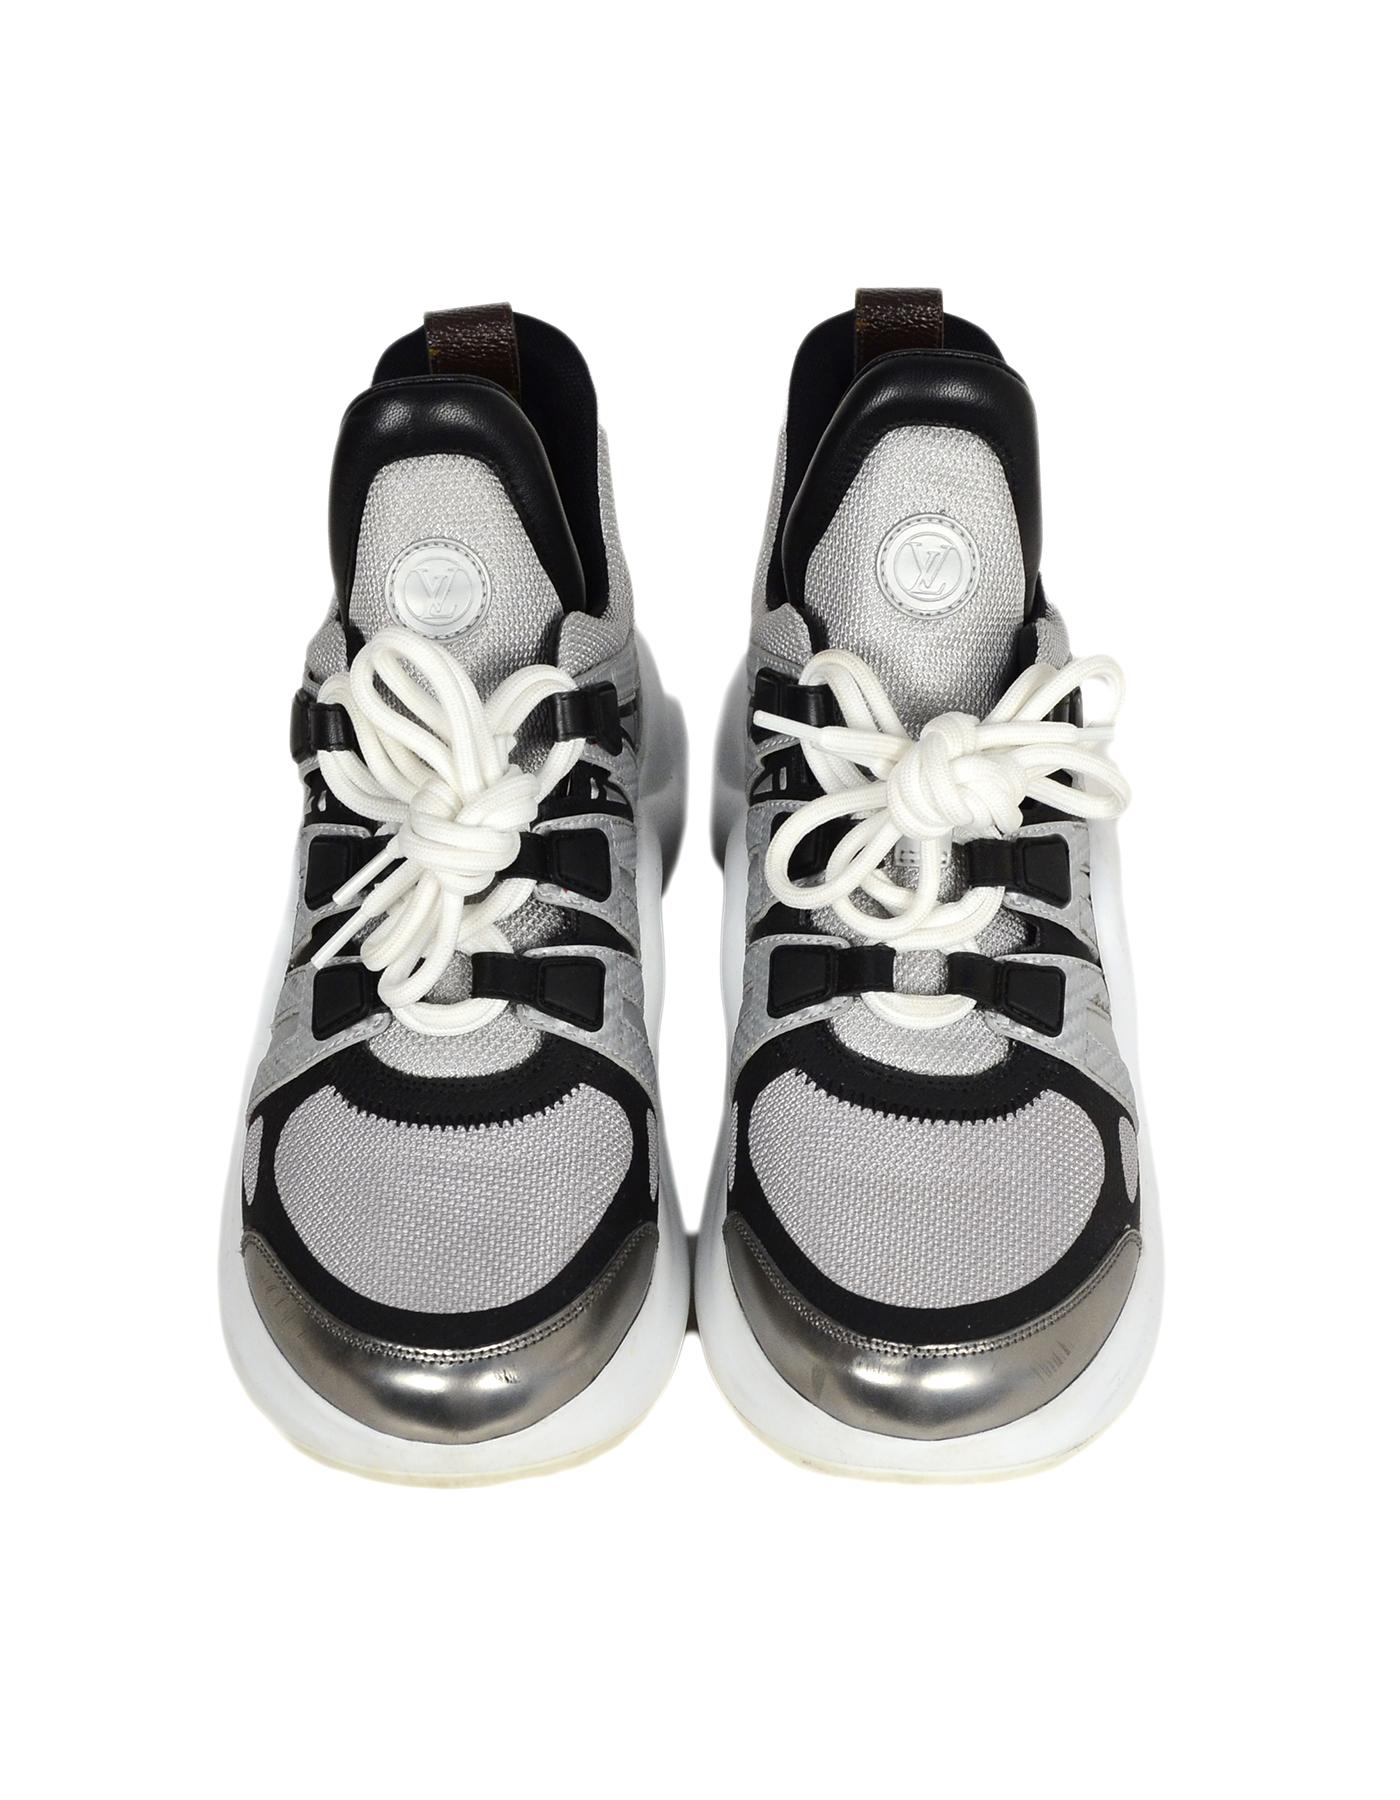 Louis Vuitton 2018 Archlight Reflective Sneakers sz 39

Made In: Italy
Year of Production: 2018
Color: Silver, black
Materials: Nylon, rubber, coated canvas trim
Closure/Opening: Lace-up
Overall Condition: Very good pre-owned condition, with the